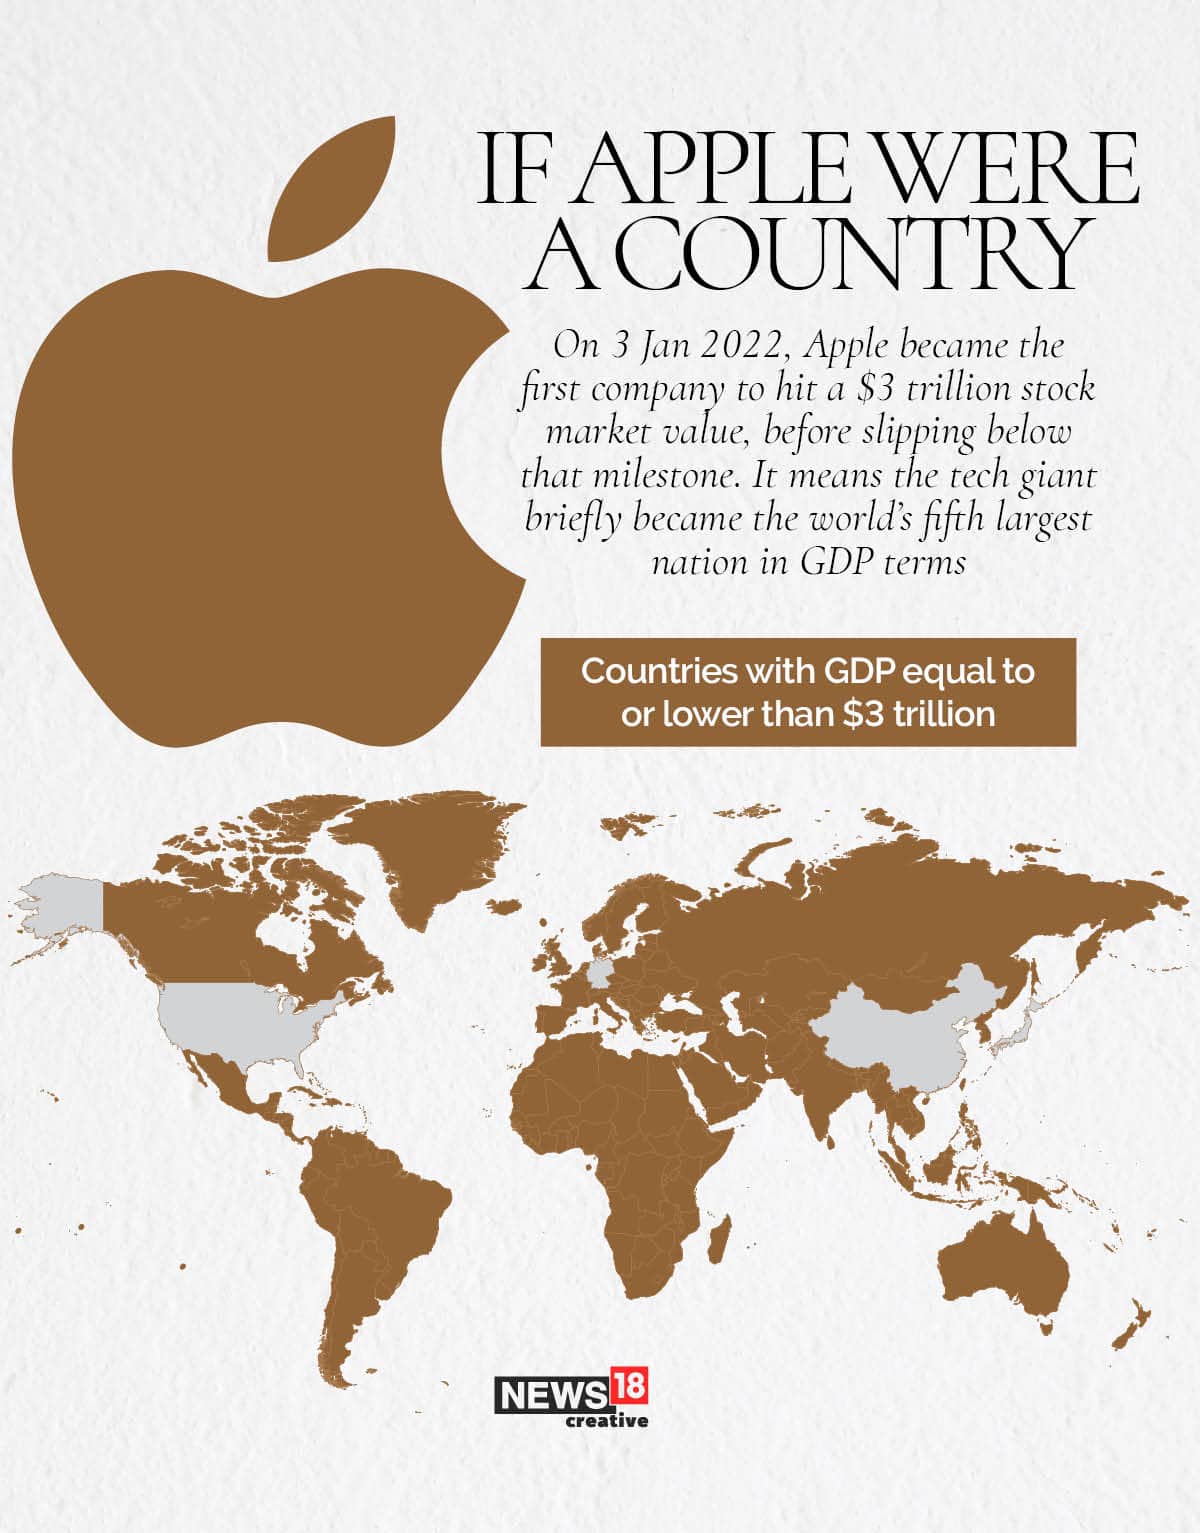 Apple IF APPLE WERE A COUNTRY_4 Jan